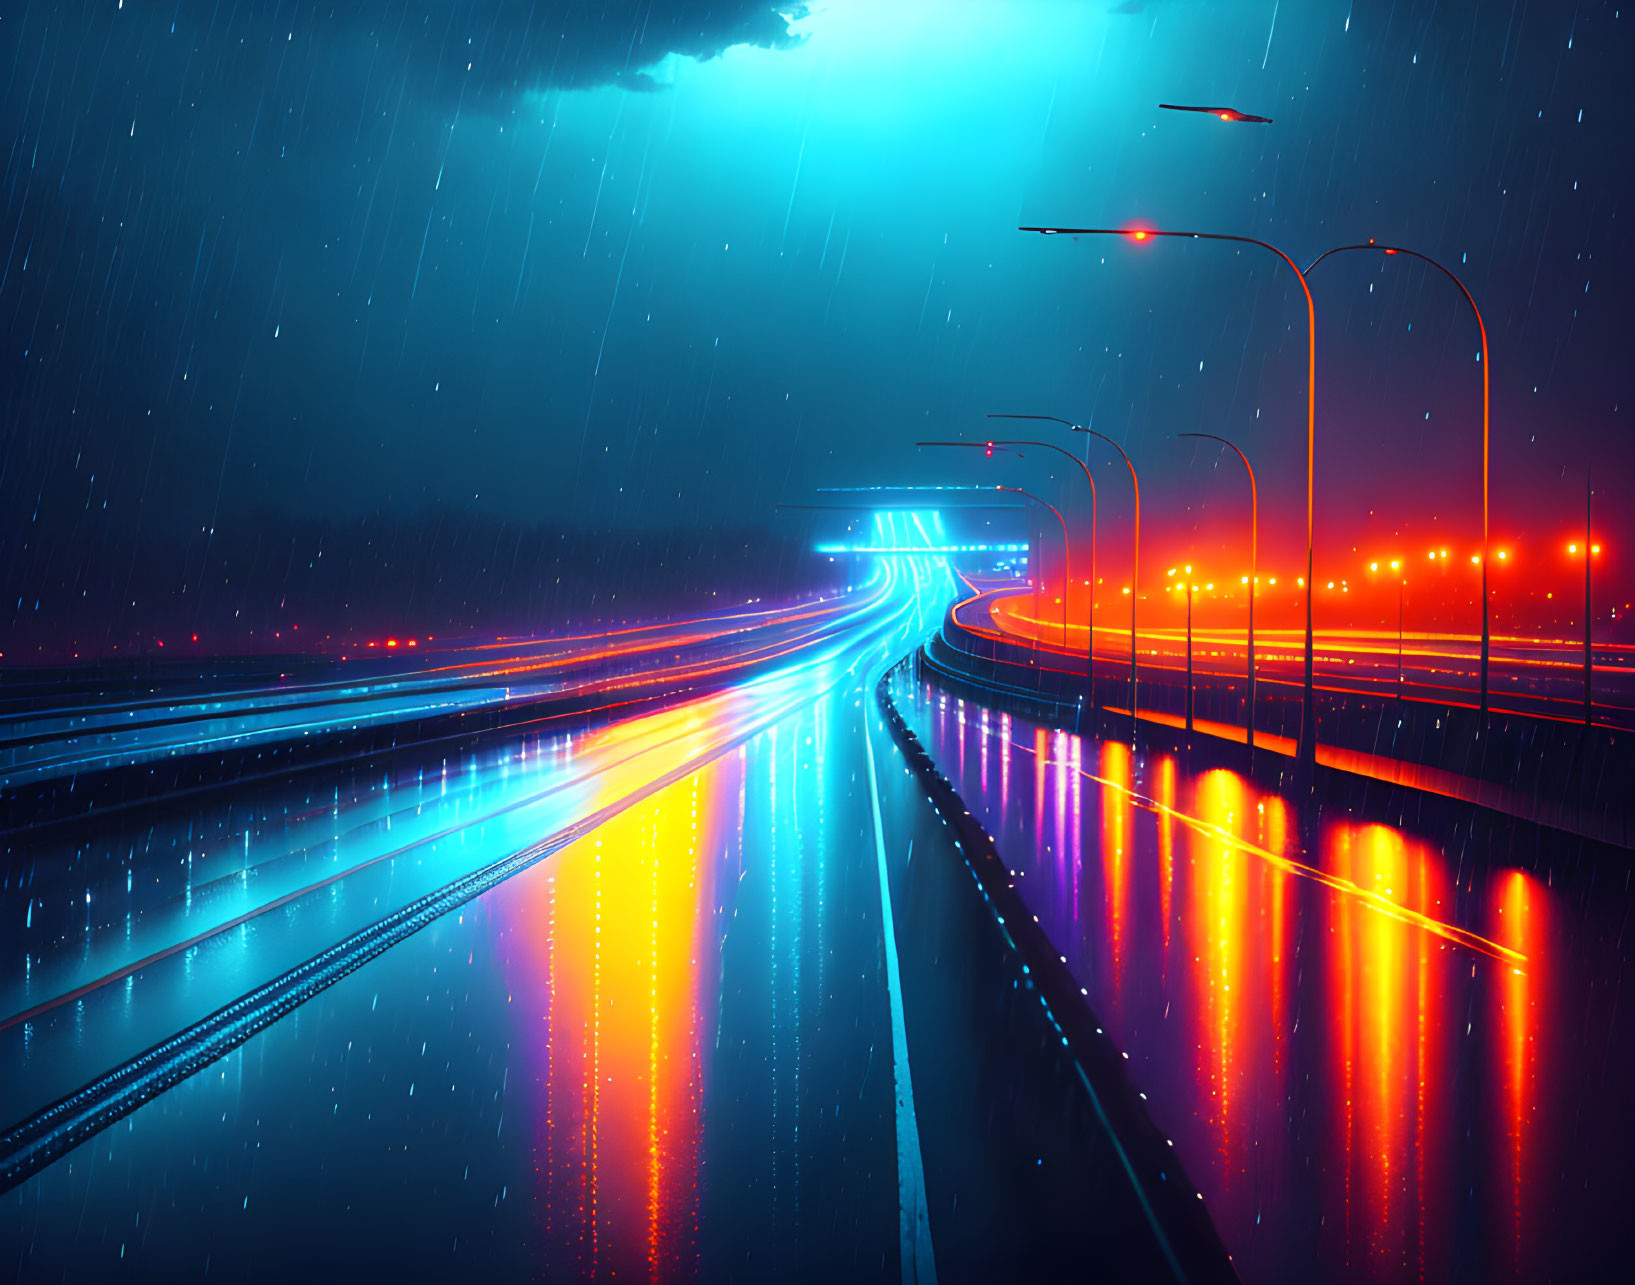 Vivid night scene: red and blue lights on wet highway under stormy sky